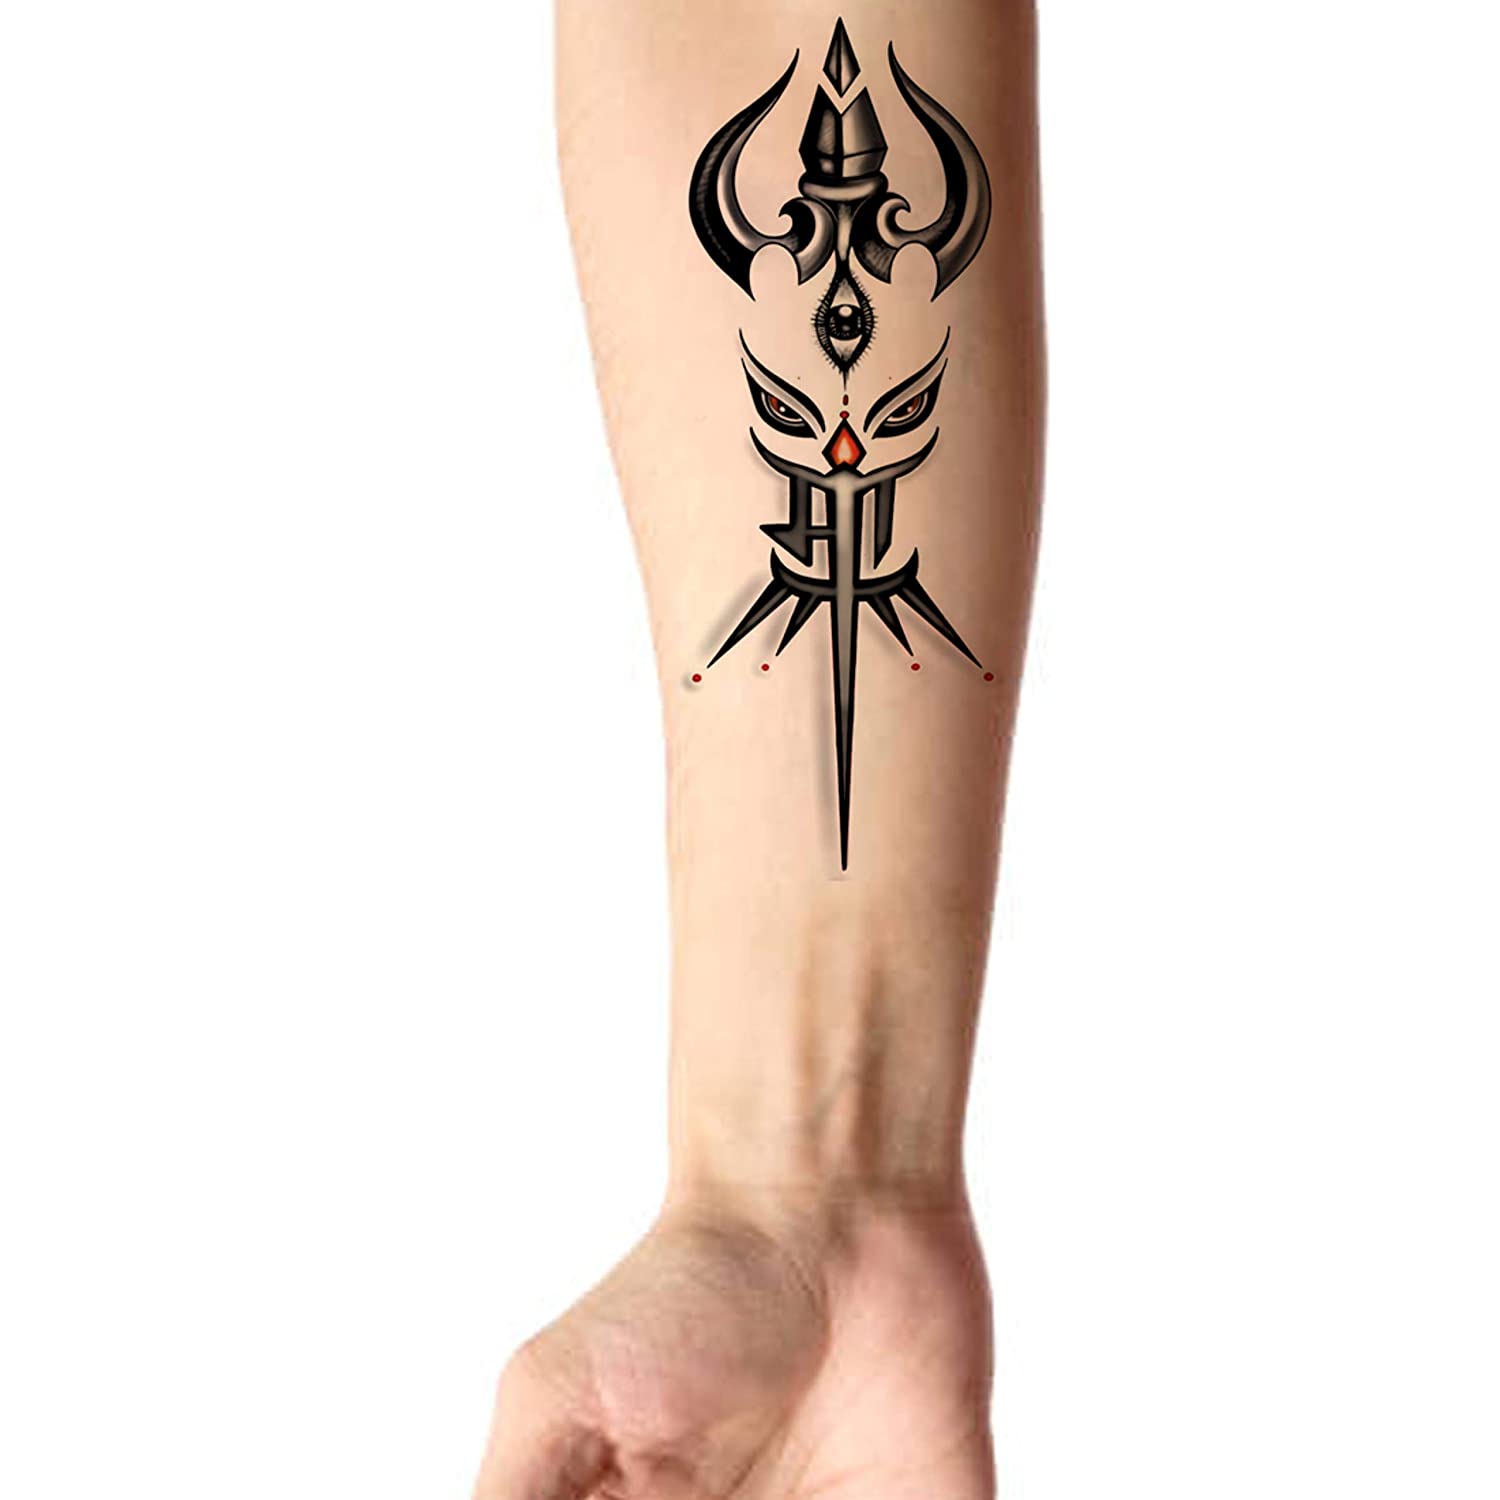 2,160 Tattoo Designs Shiva Images, Stock Photos, 3D objects, & Vectors |  Shutterstock